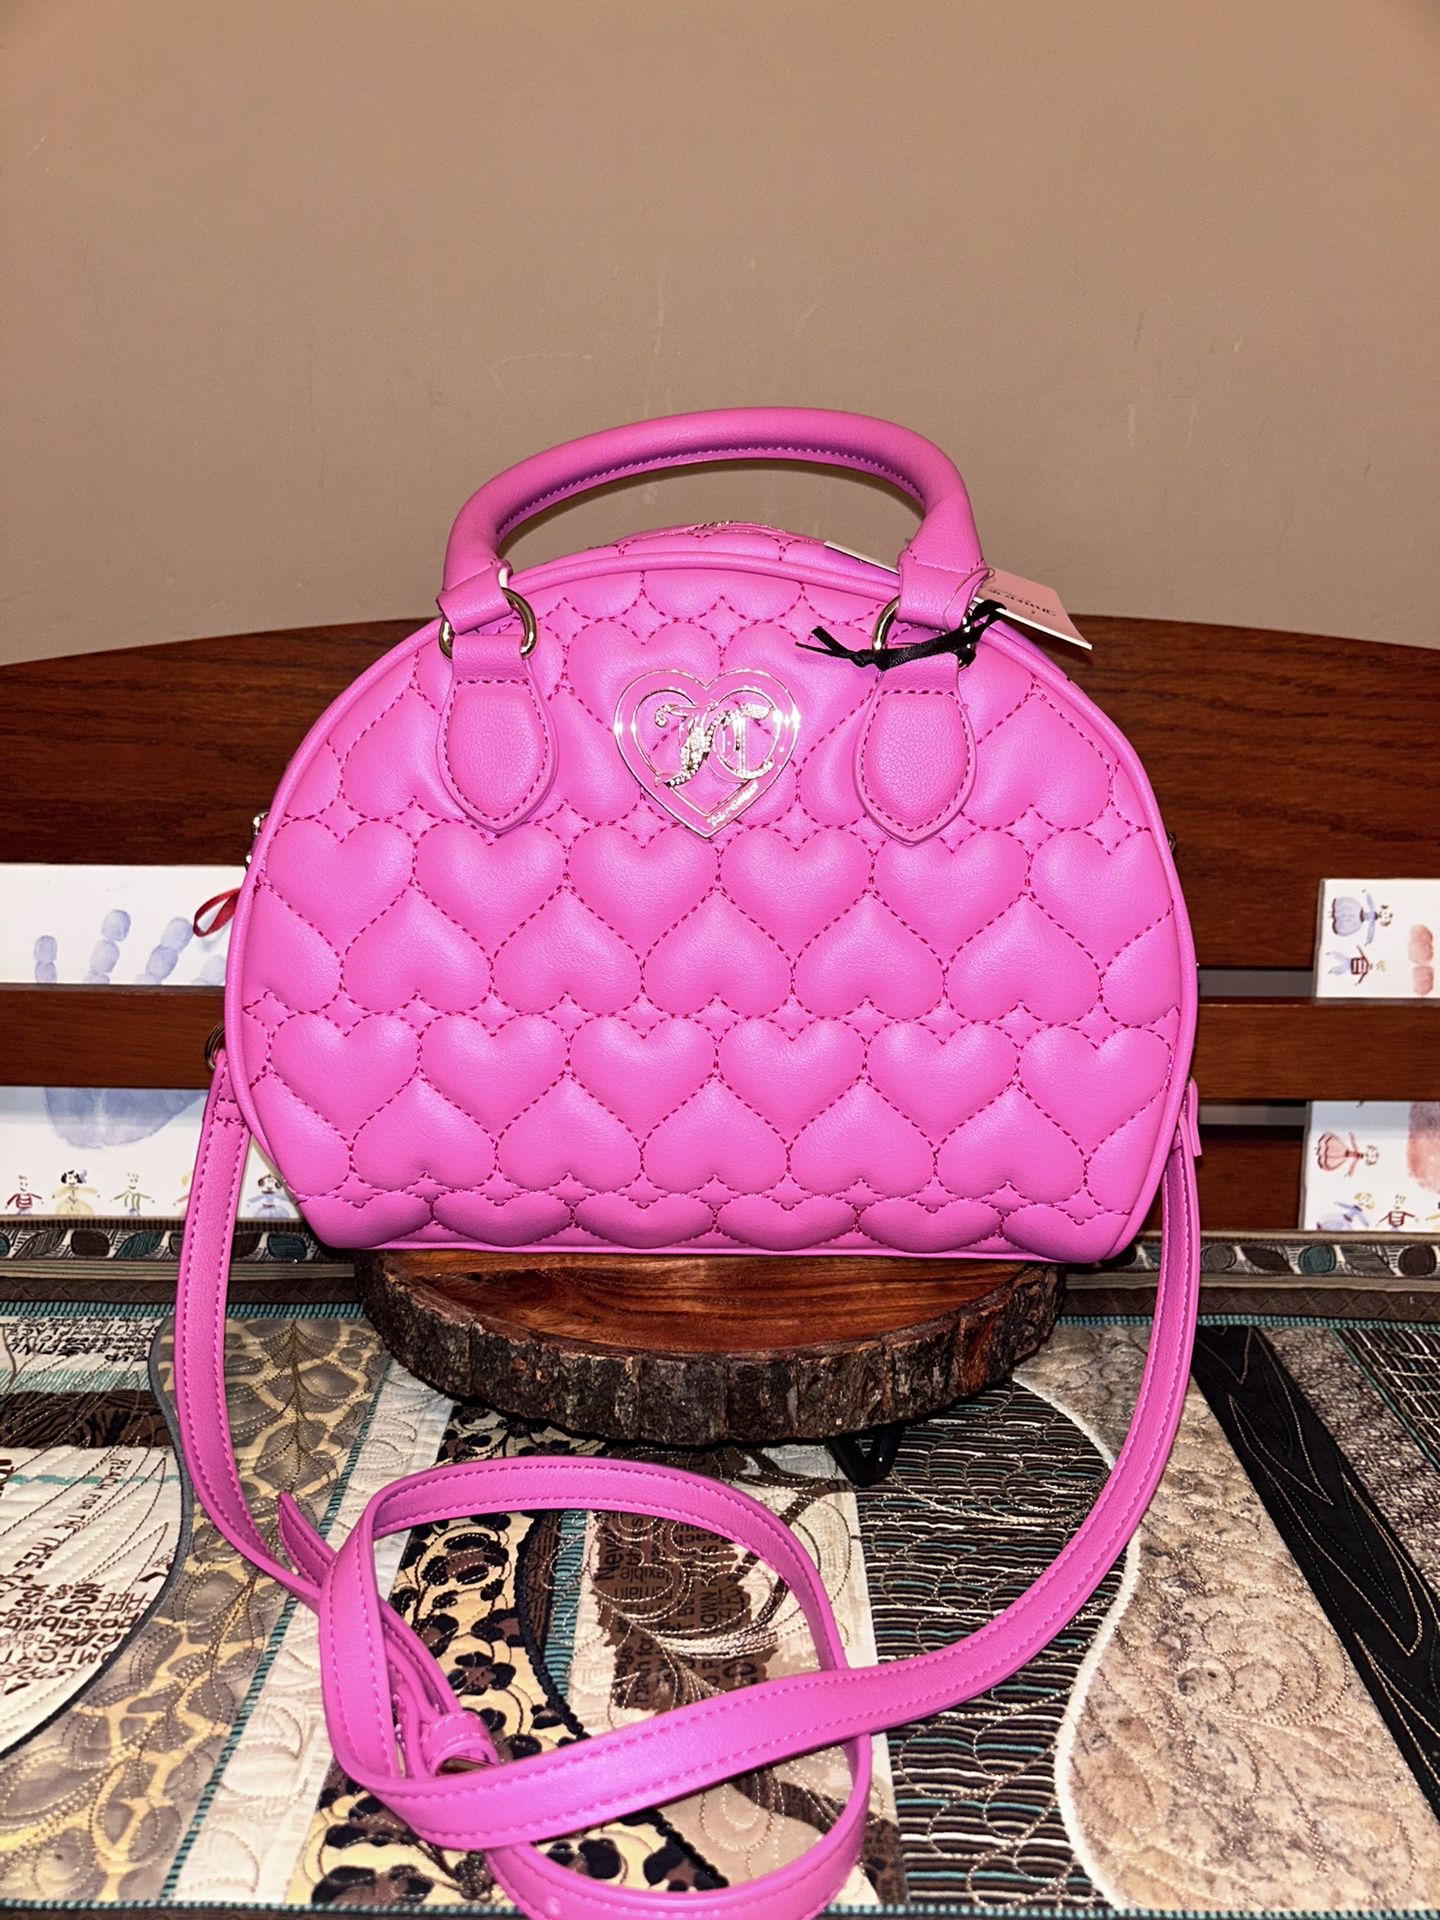 Juicy Heart Quilted Dome Satchel